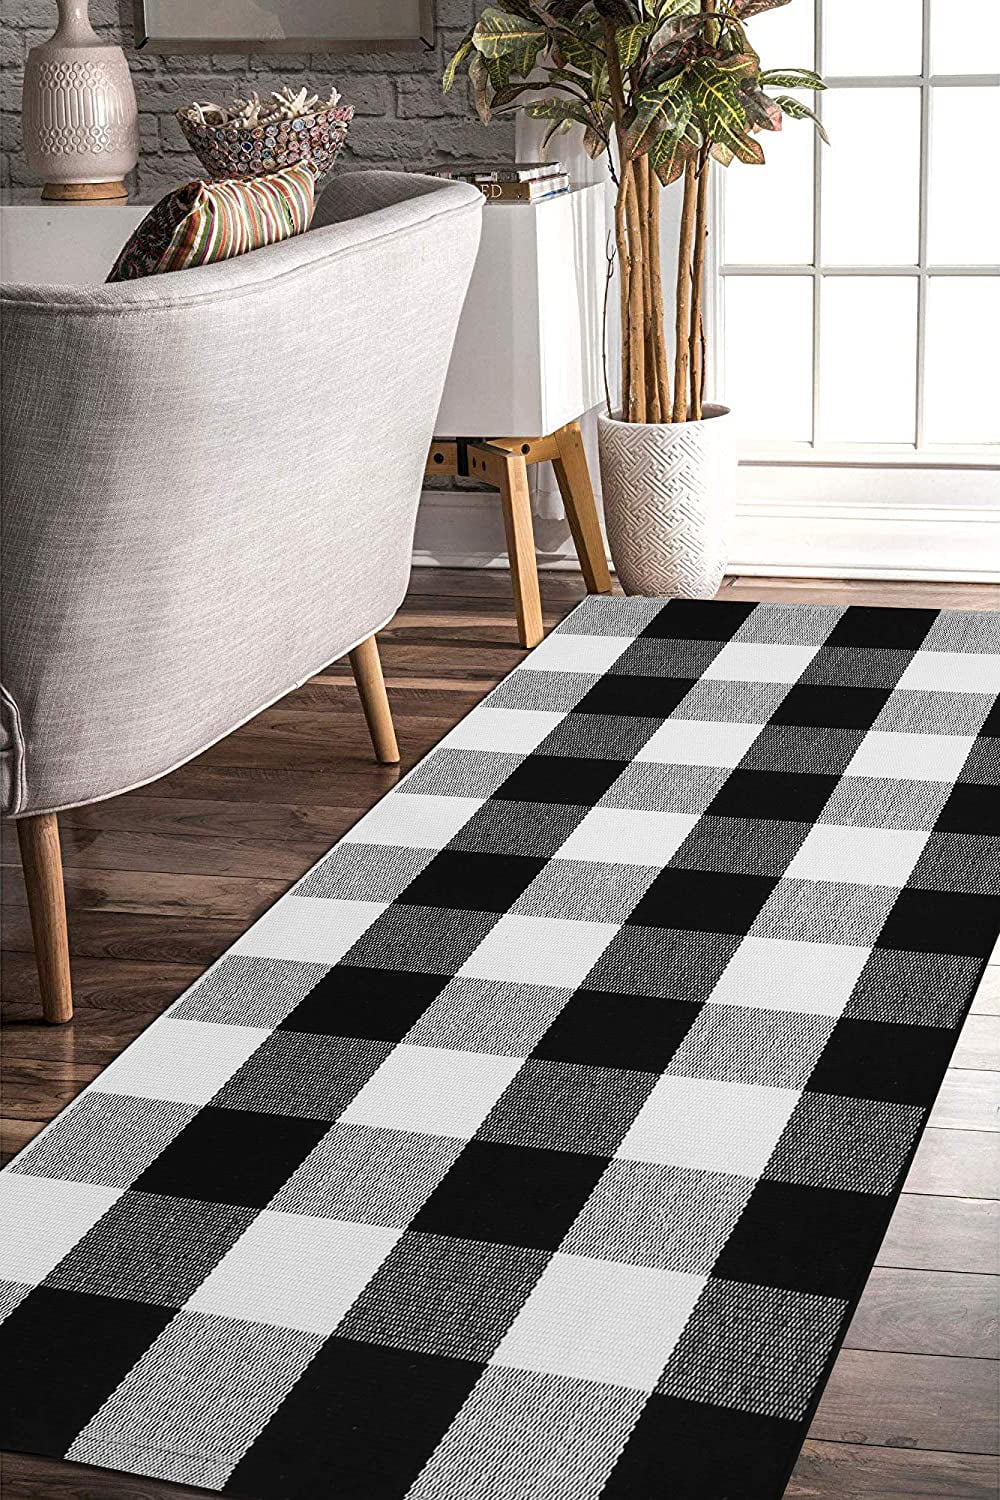 23.6x51 Christmas-Deacortive Indoor/Outdoor Rugs for Layered-Washable Carpet for Front Porch/Kitchen Cotton-Checkered-Doormats Buffalo-Plaid-Rug Black/White Plaid